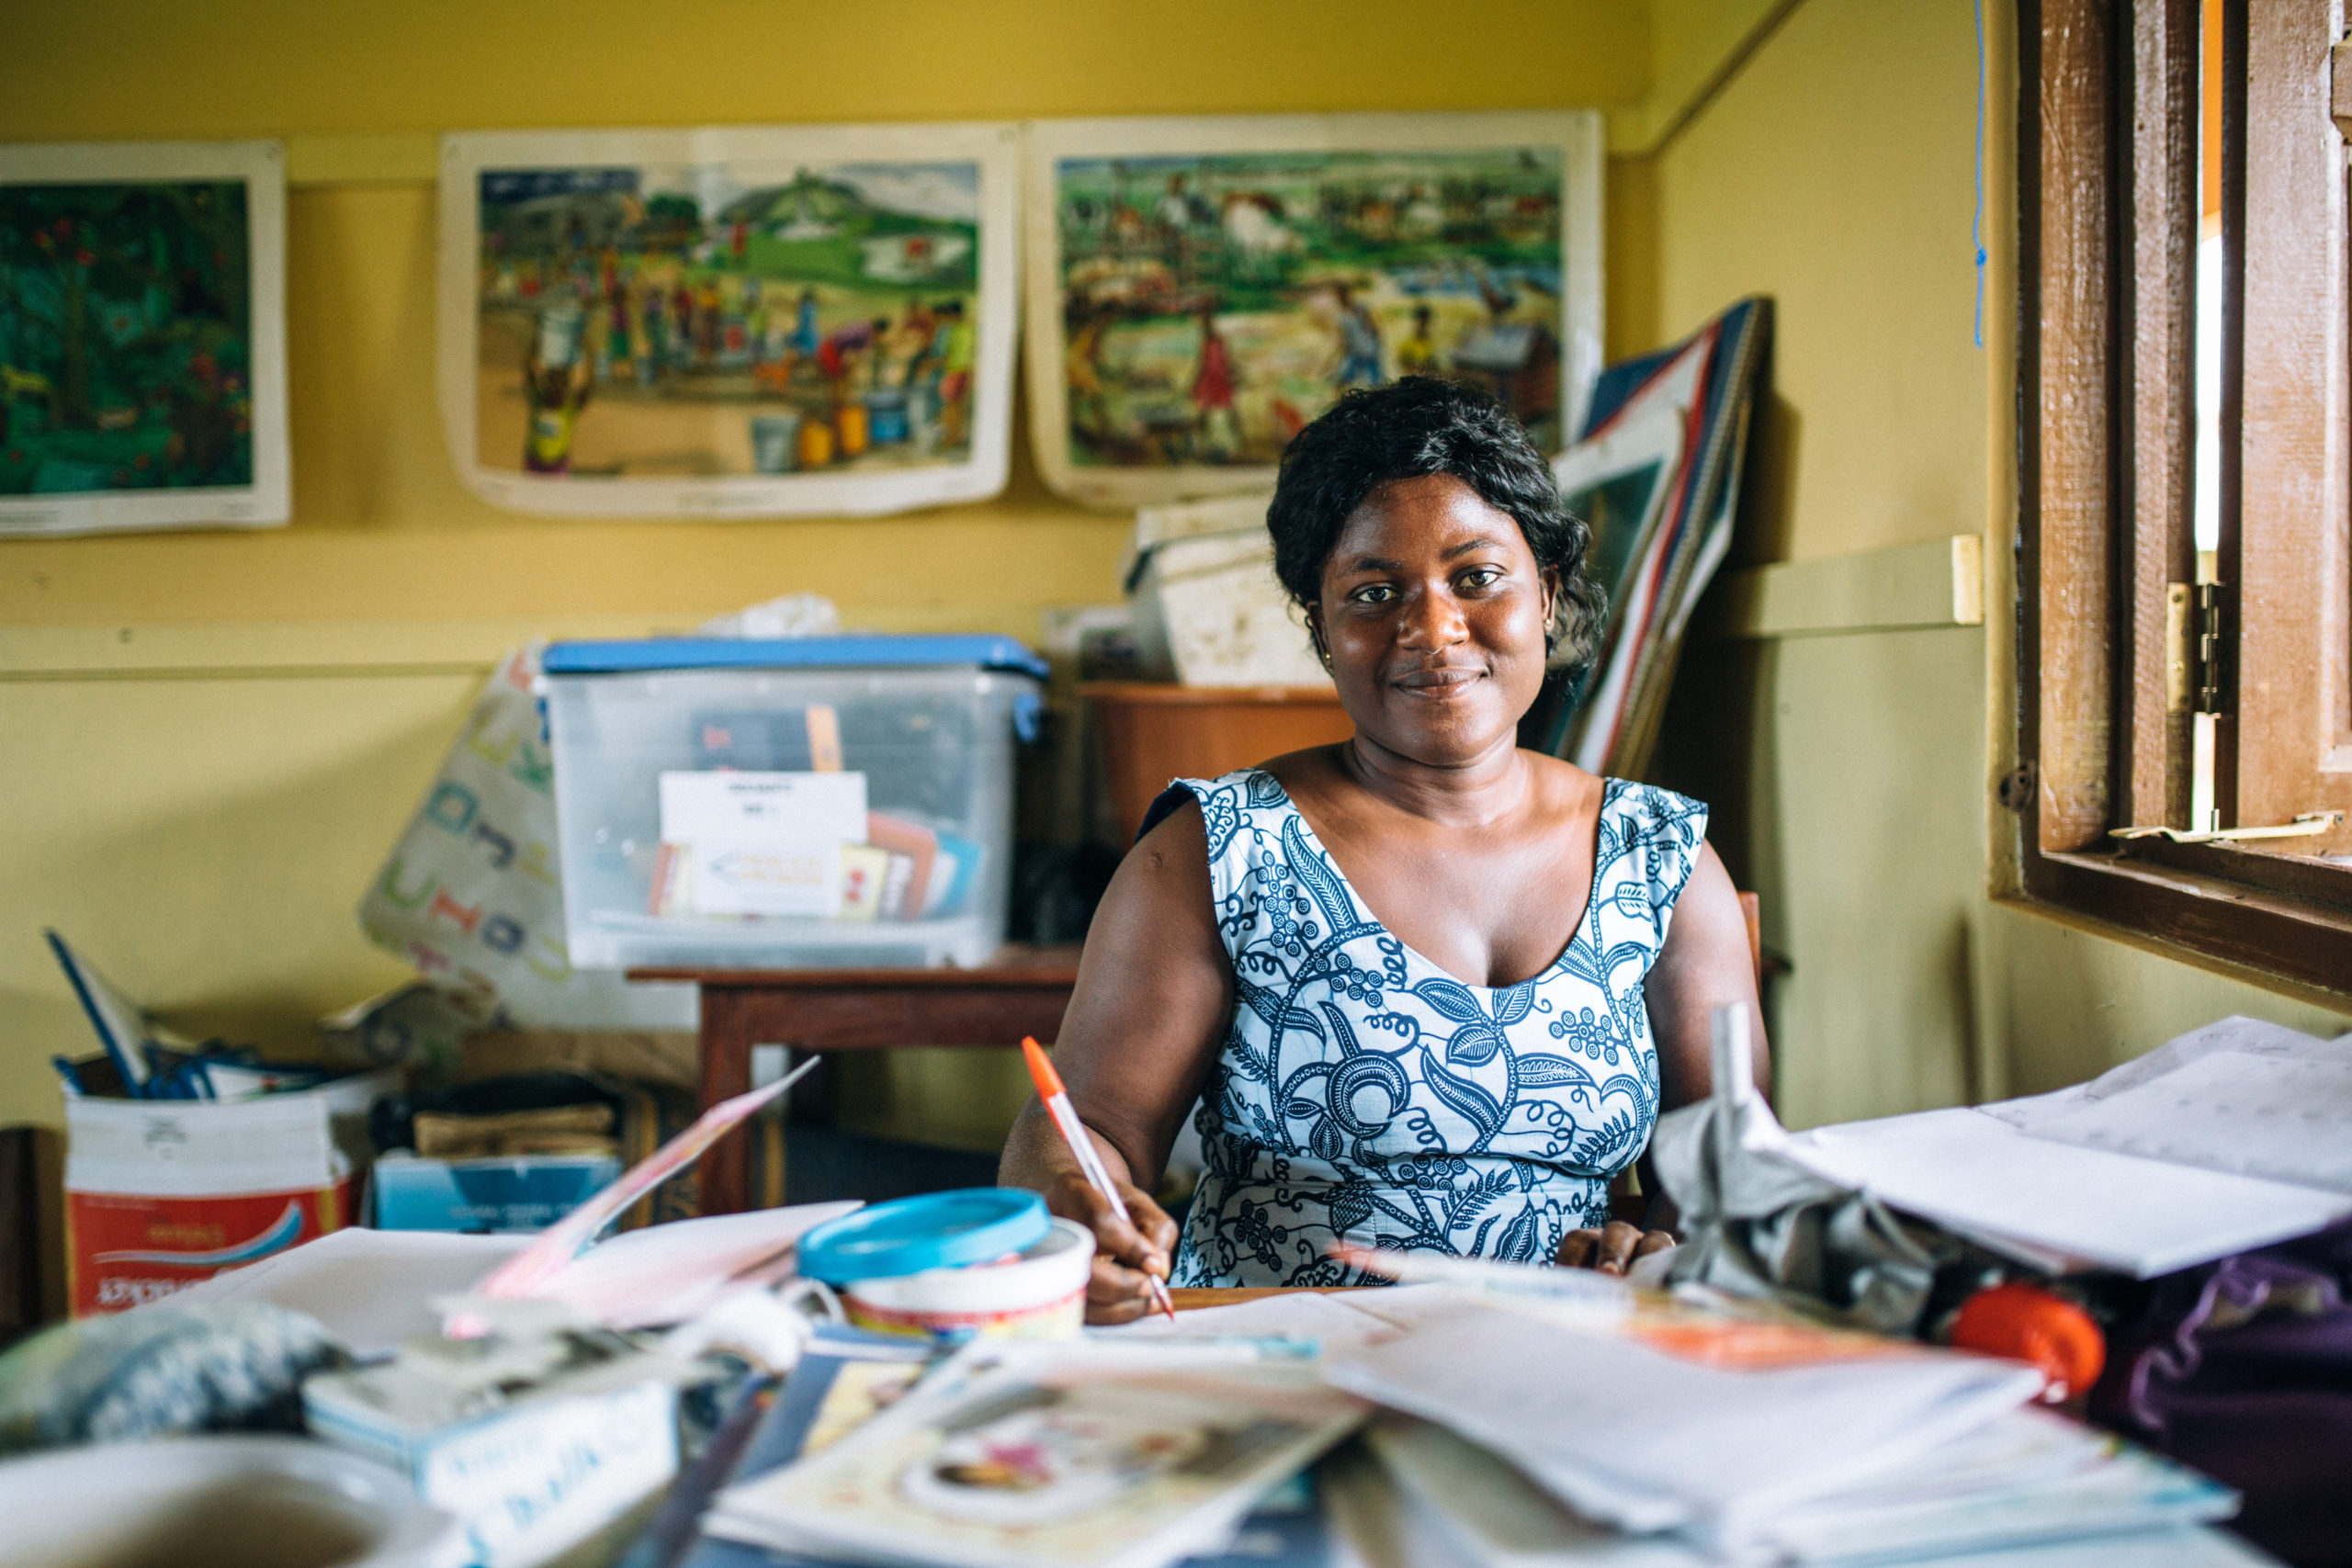 A teacher in Ghana sits at their desk grading papers inside a classroom | Photo credit: Timmy Shivers